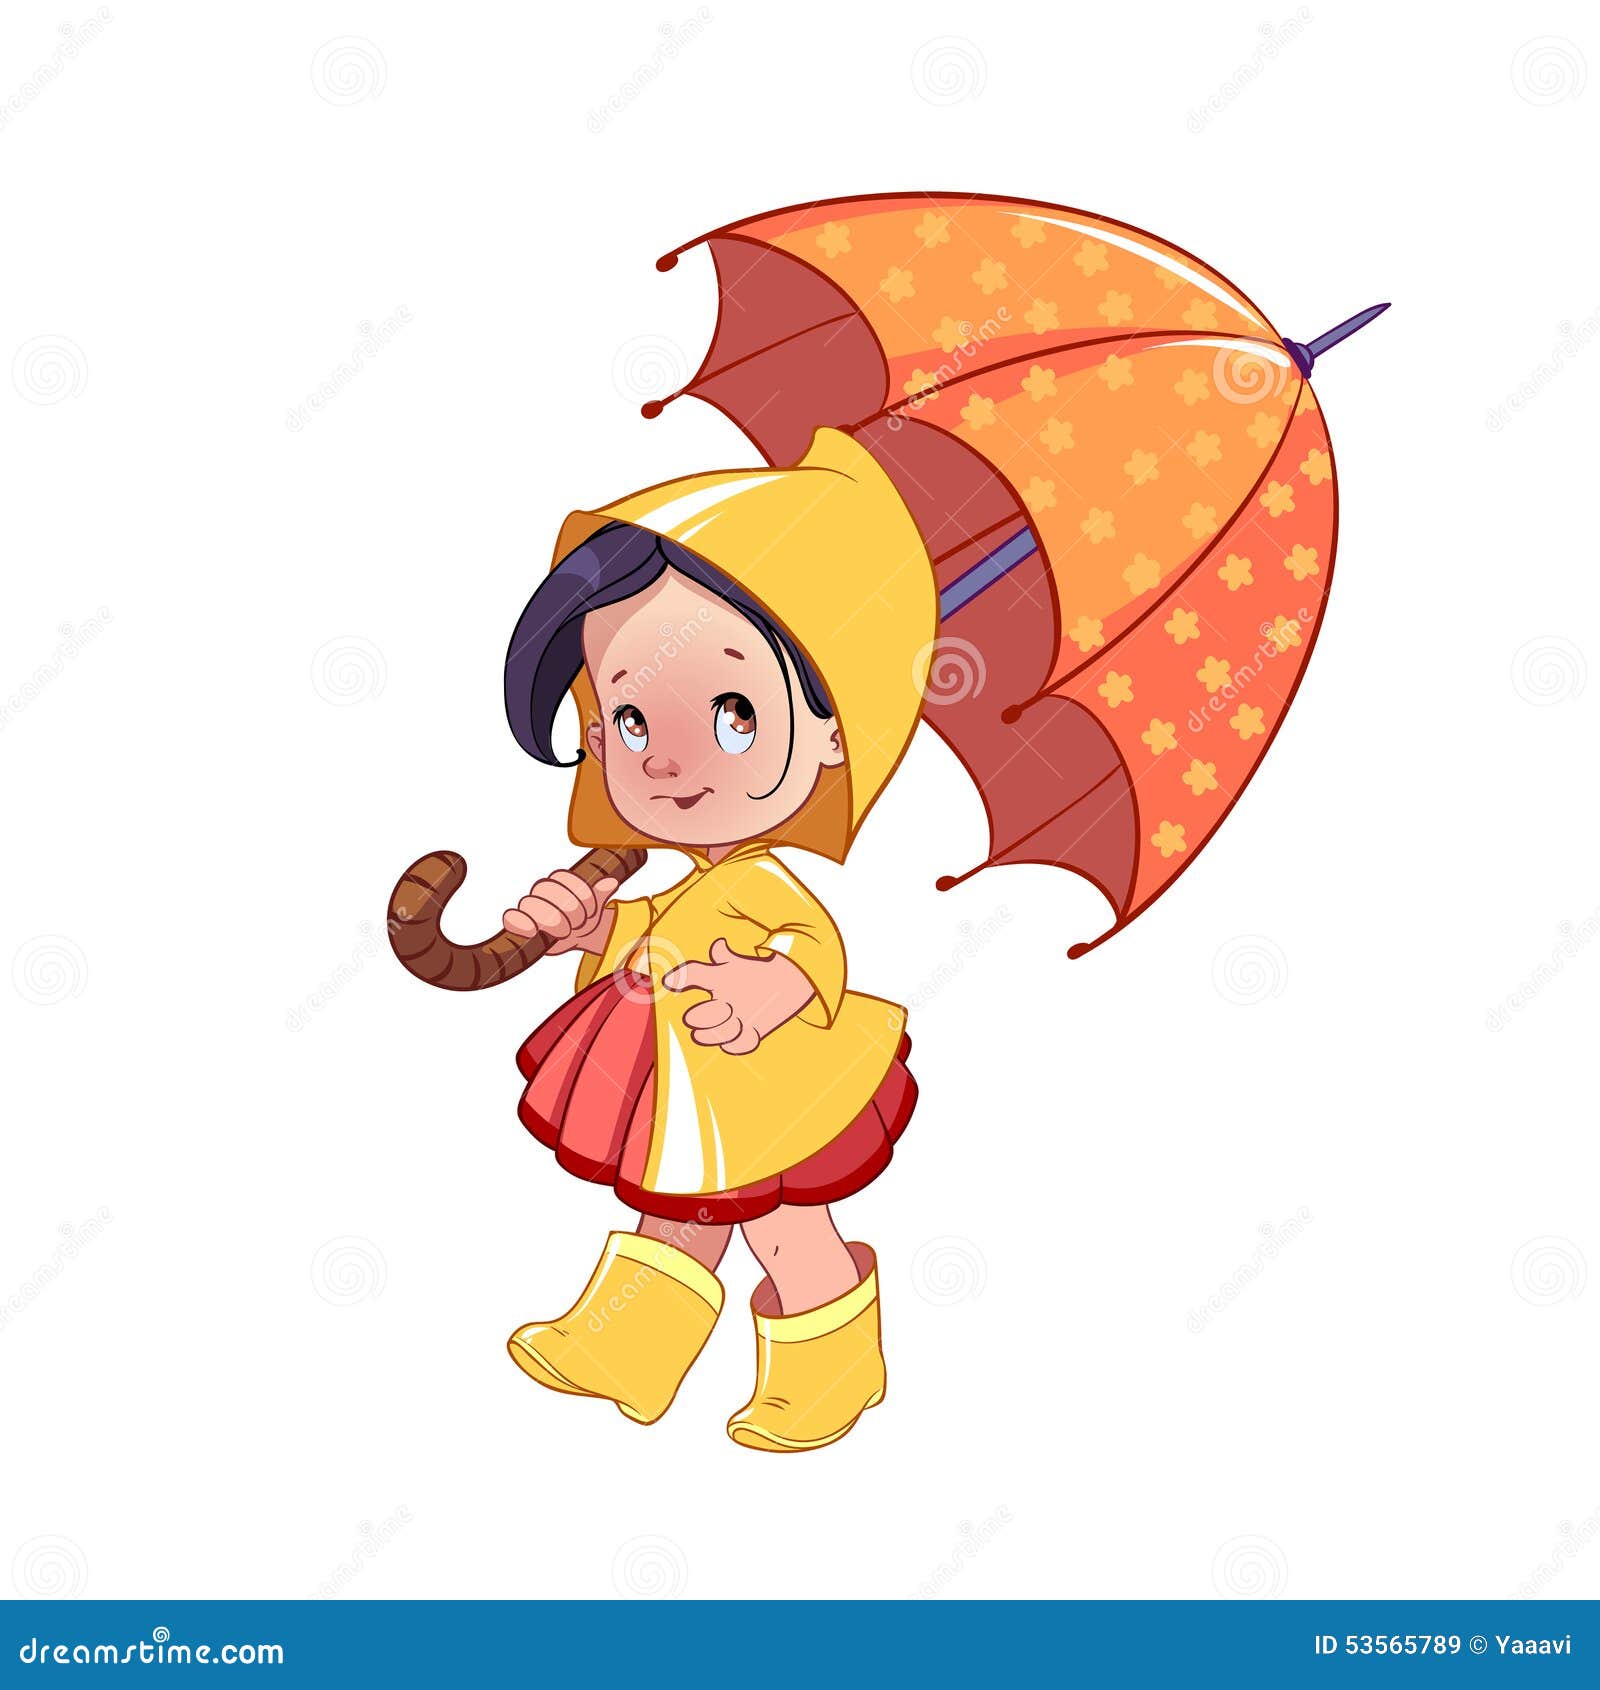 How to draw a girl with umbrella step by step || Pencil drawing for  tutorial || Easy drawing | Use Materials in current video 👇👇👇👇👇👇  Pencils https://amzn.to/3OU6vl3 Drawing Paper https://amzn.to/3NZx6Mq  Blending Stumps